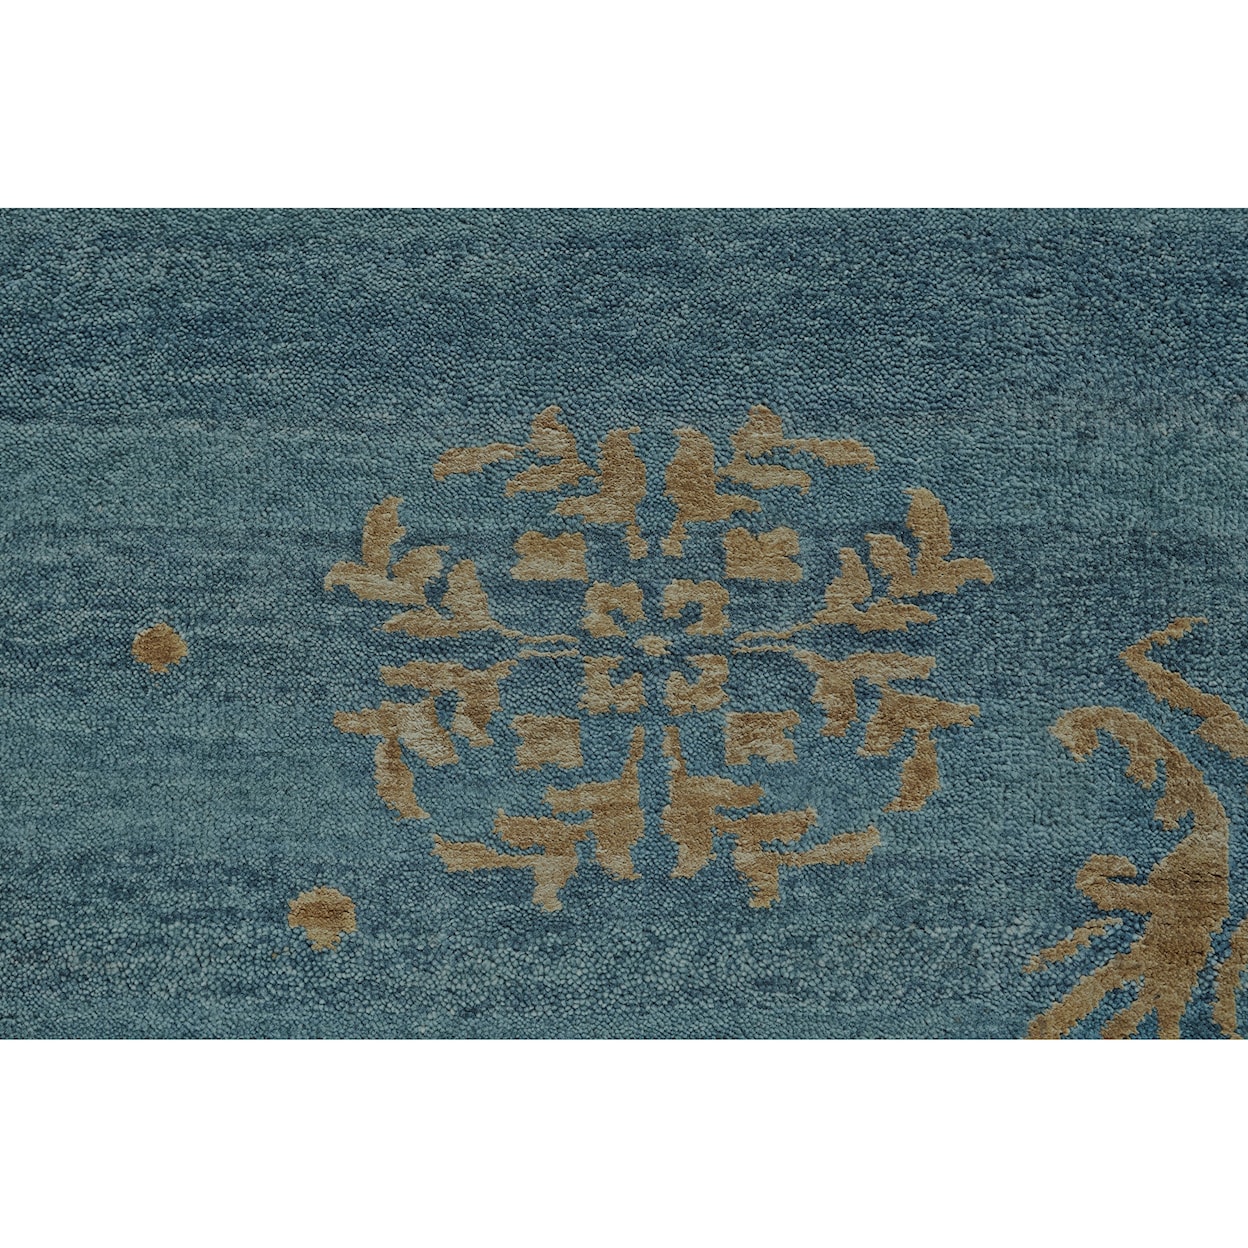 Feizy Rugs Qing Teal 4' x 6' Area Rug